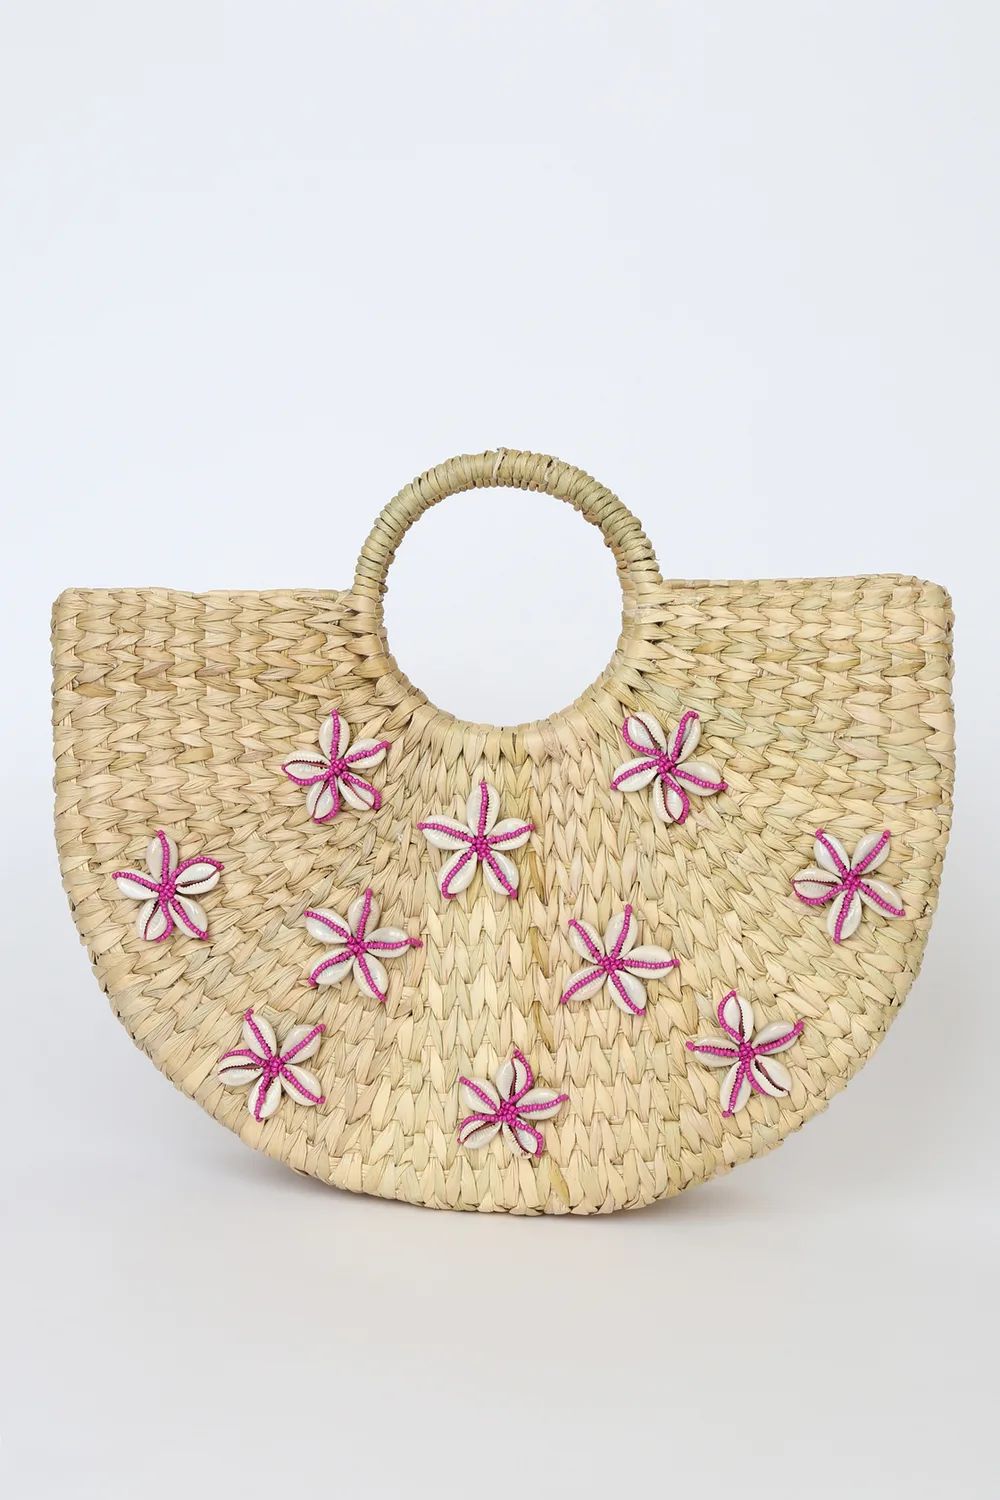 Shells in The Sand Beige and Pink Woven Straw Tote | Lulus (US)